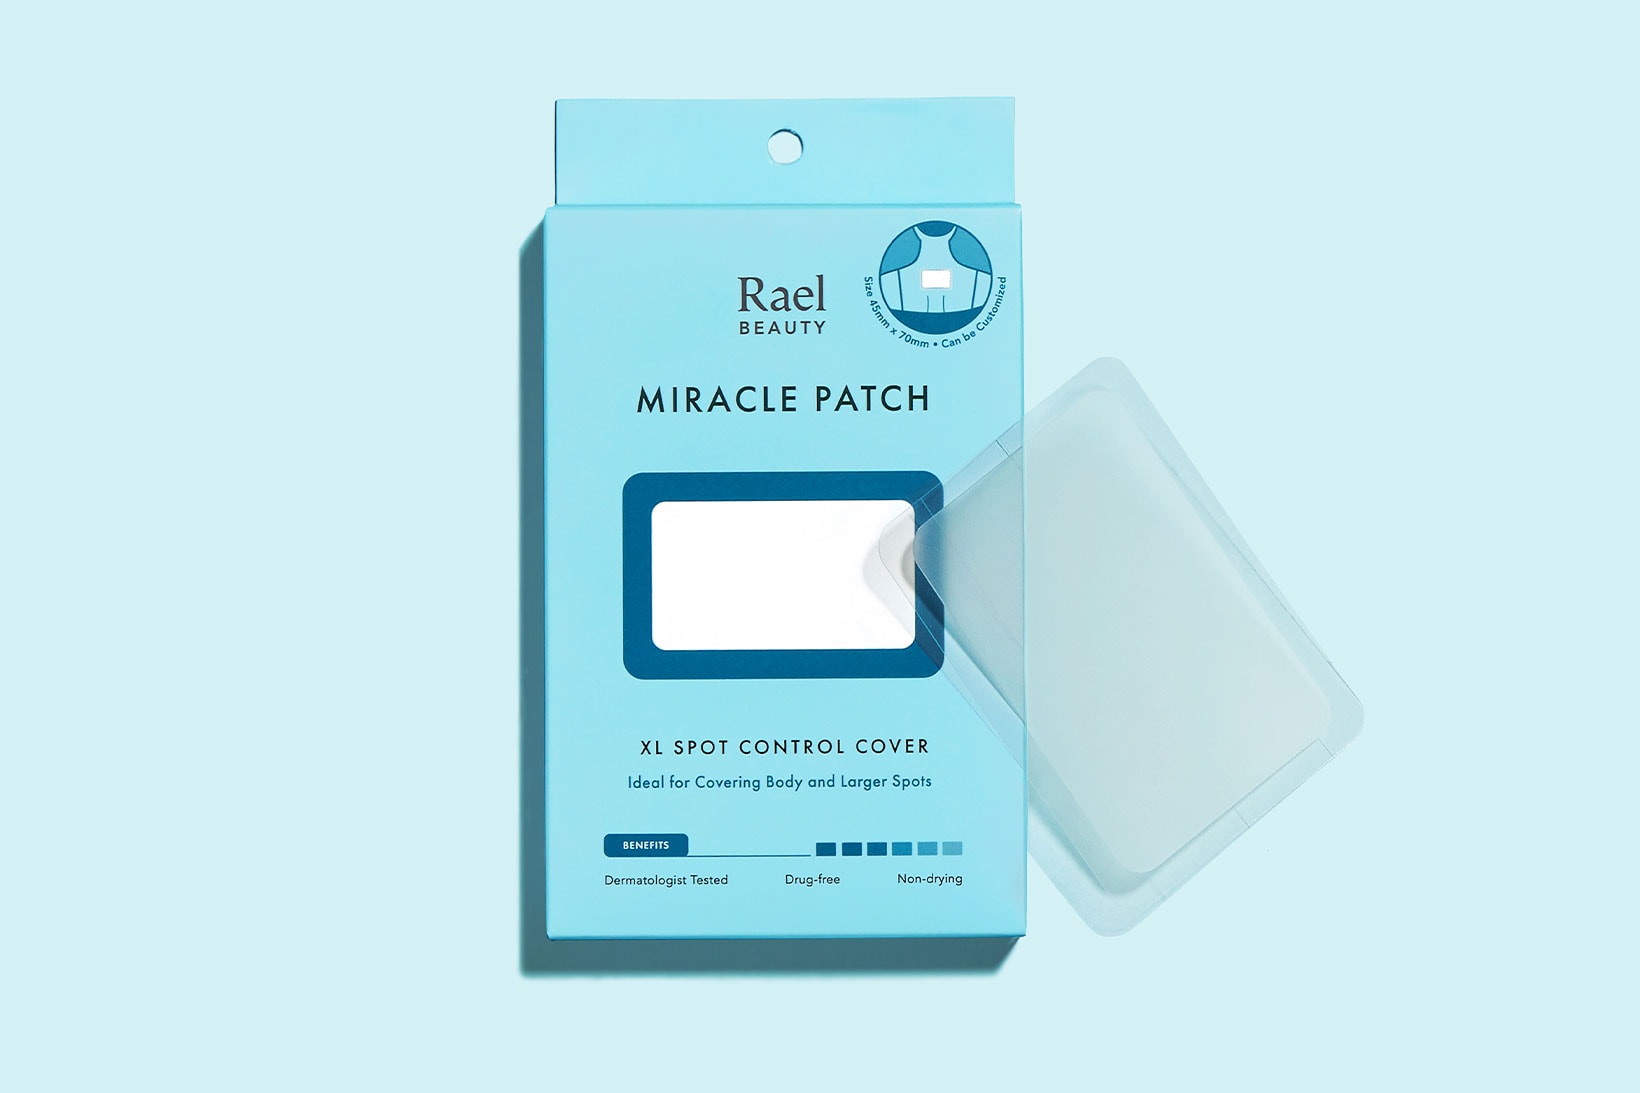 Rael miracle patch xl spot control cover box